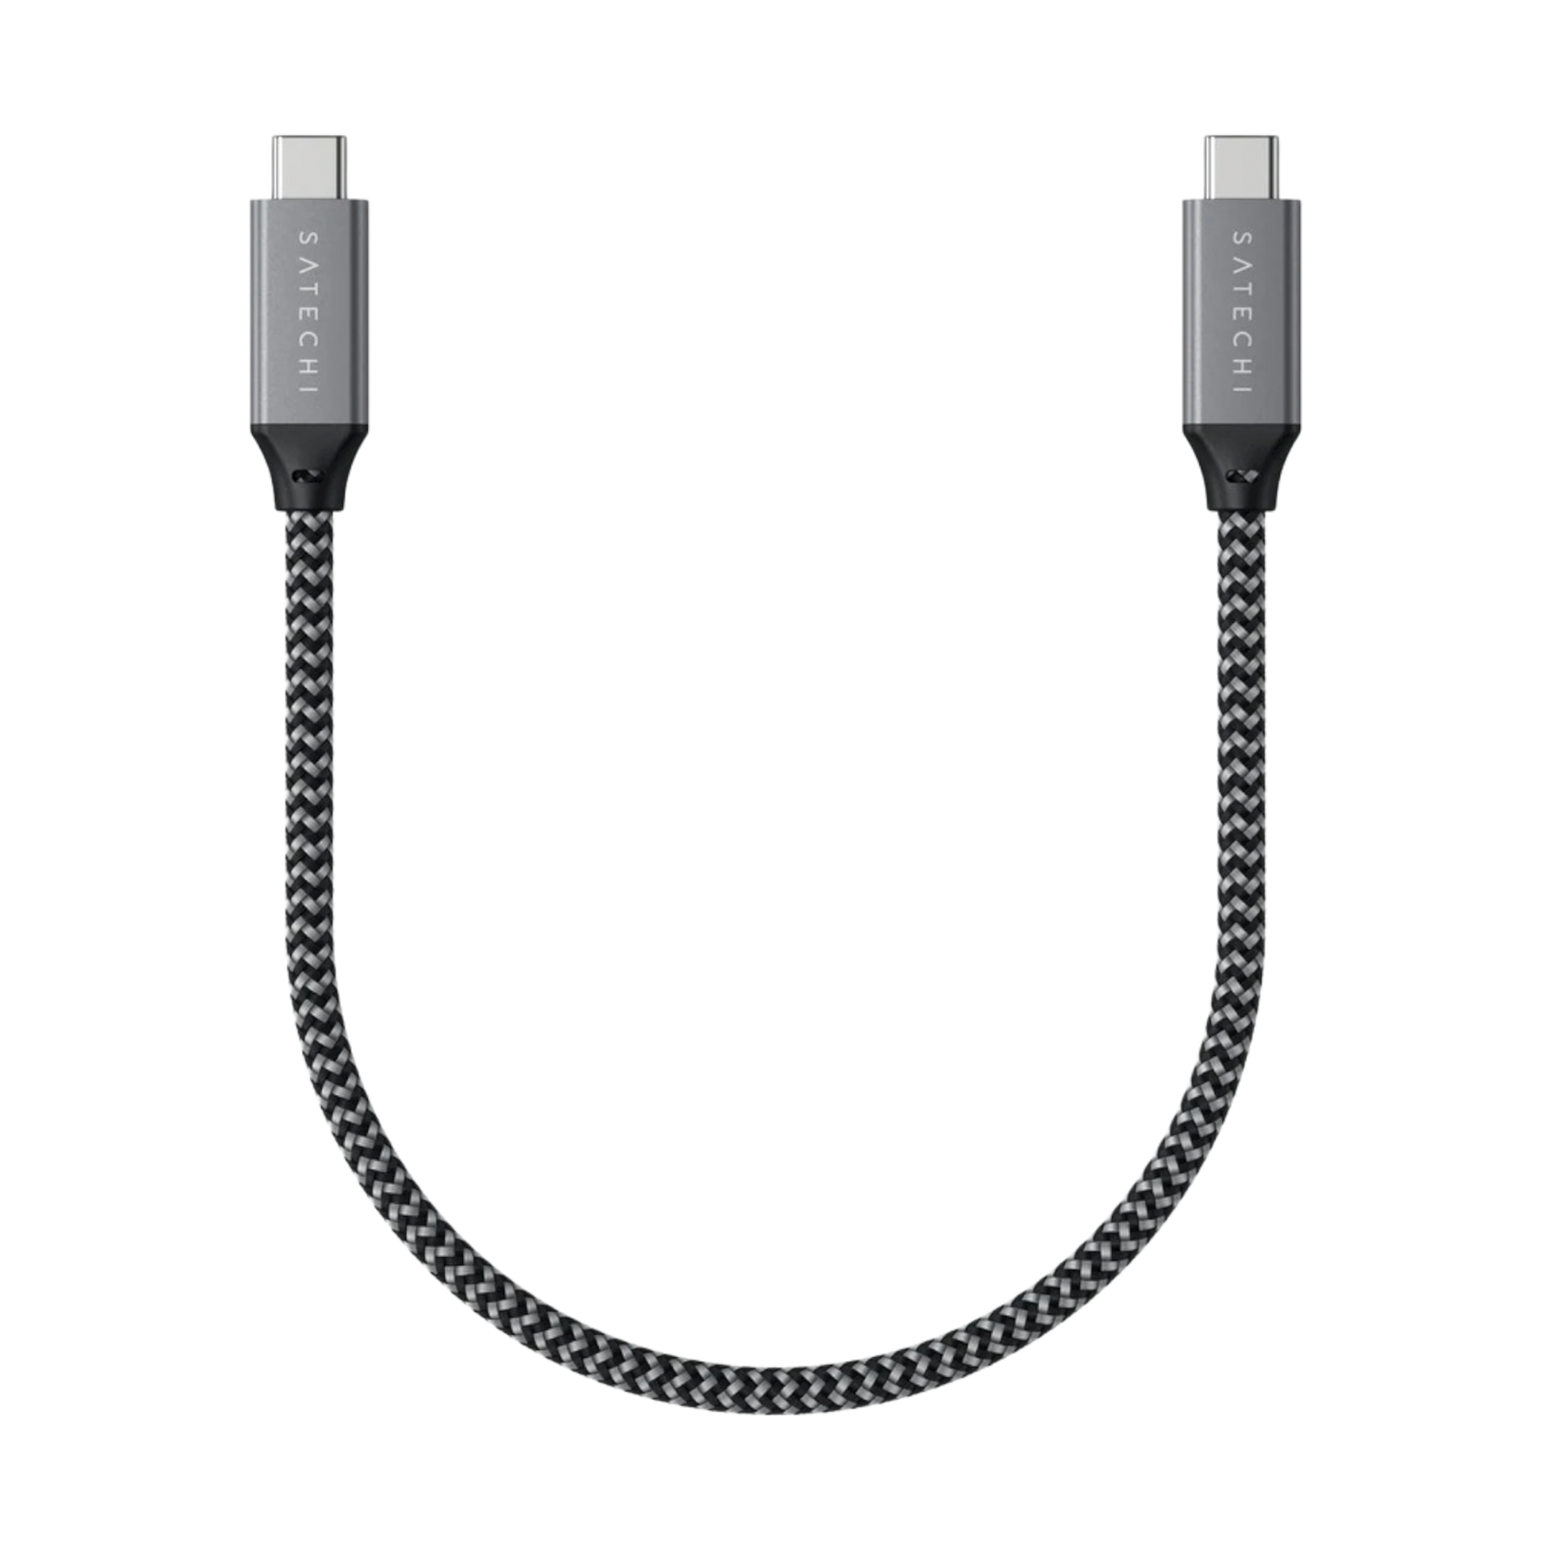 Satechi USB4 C-to-C Cable - 0.25m